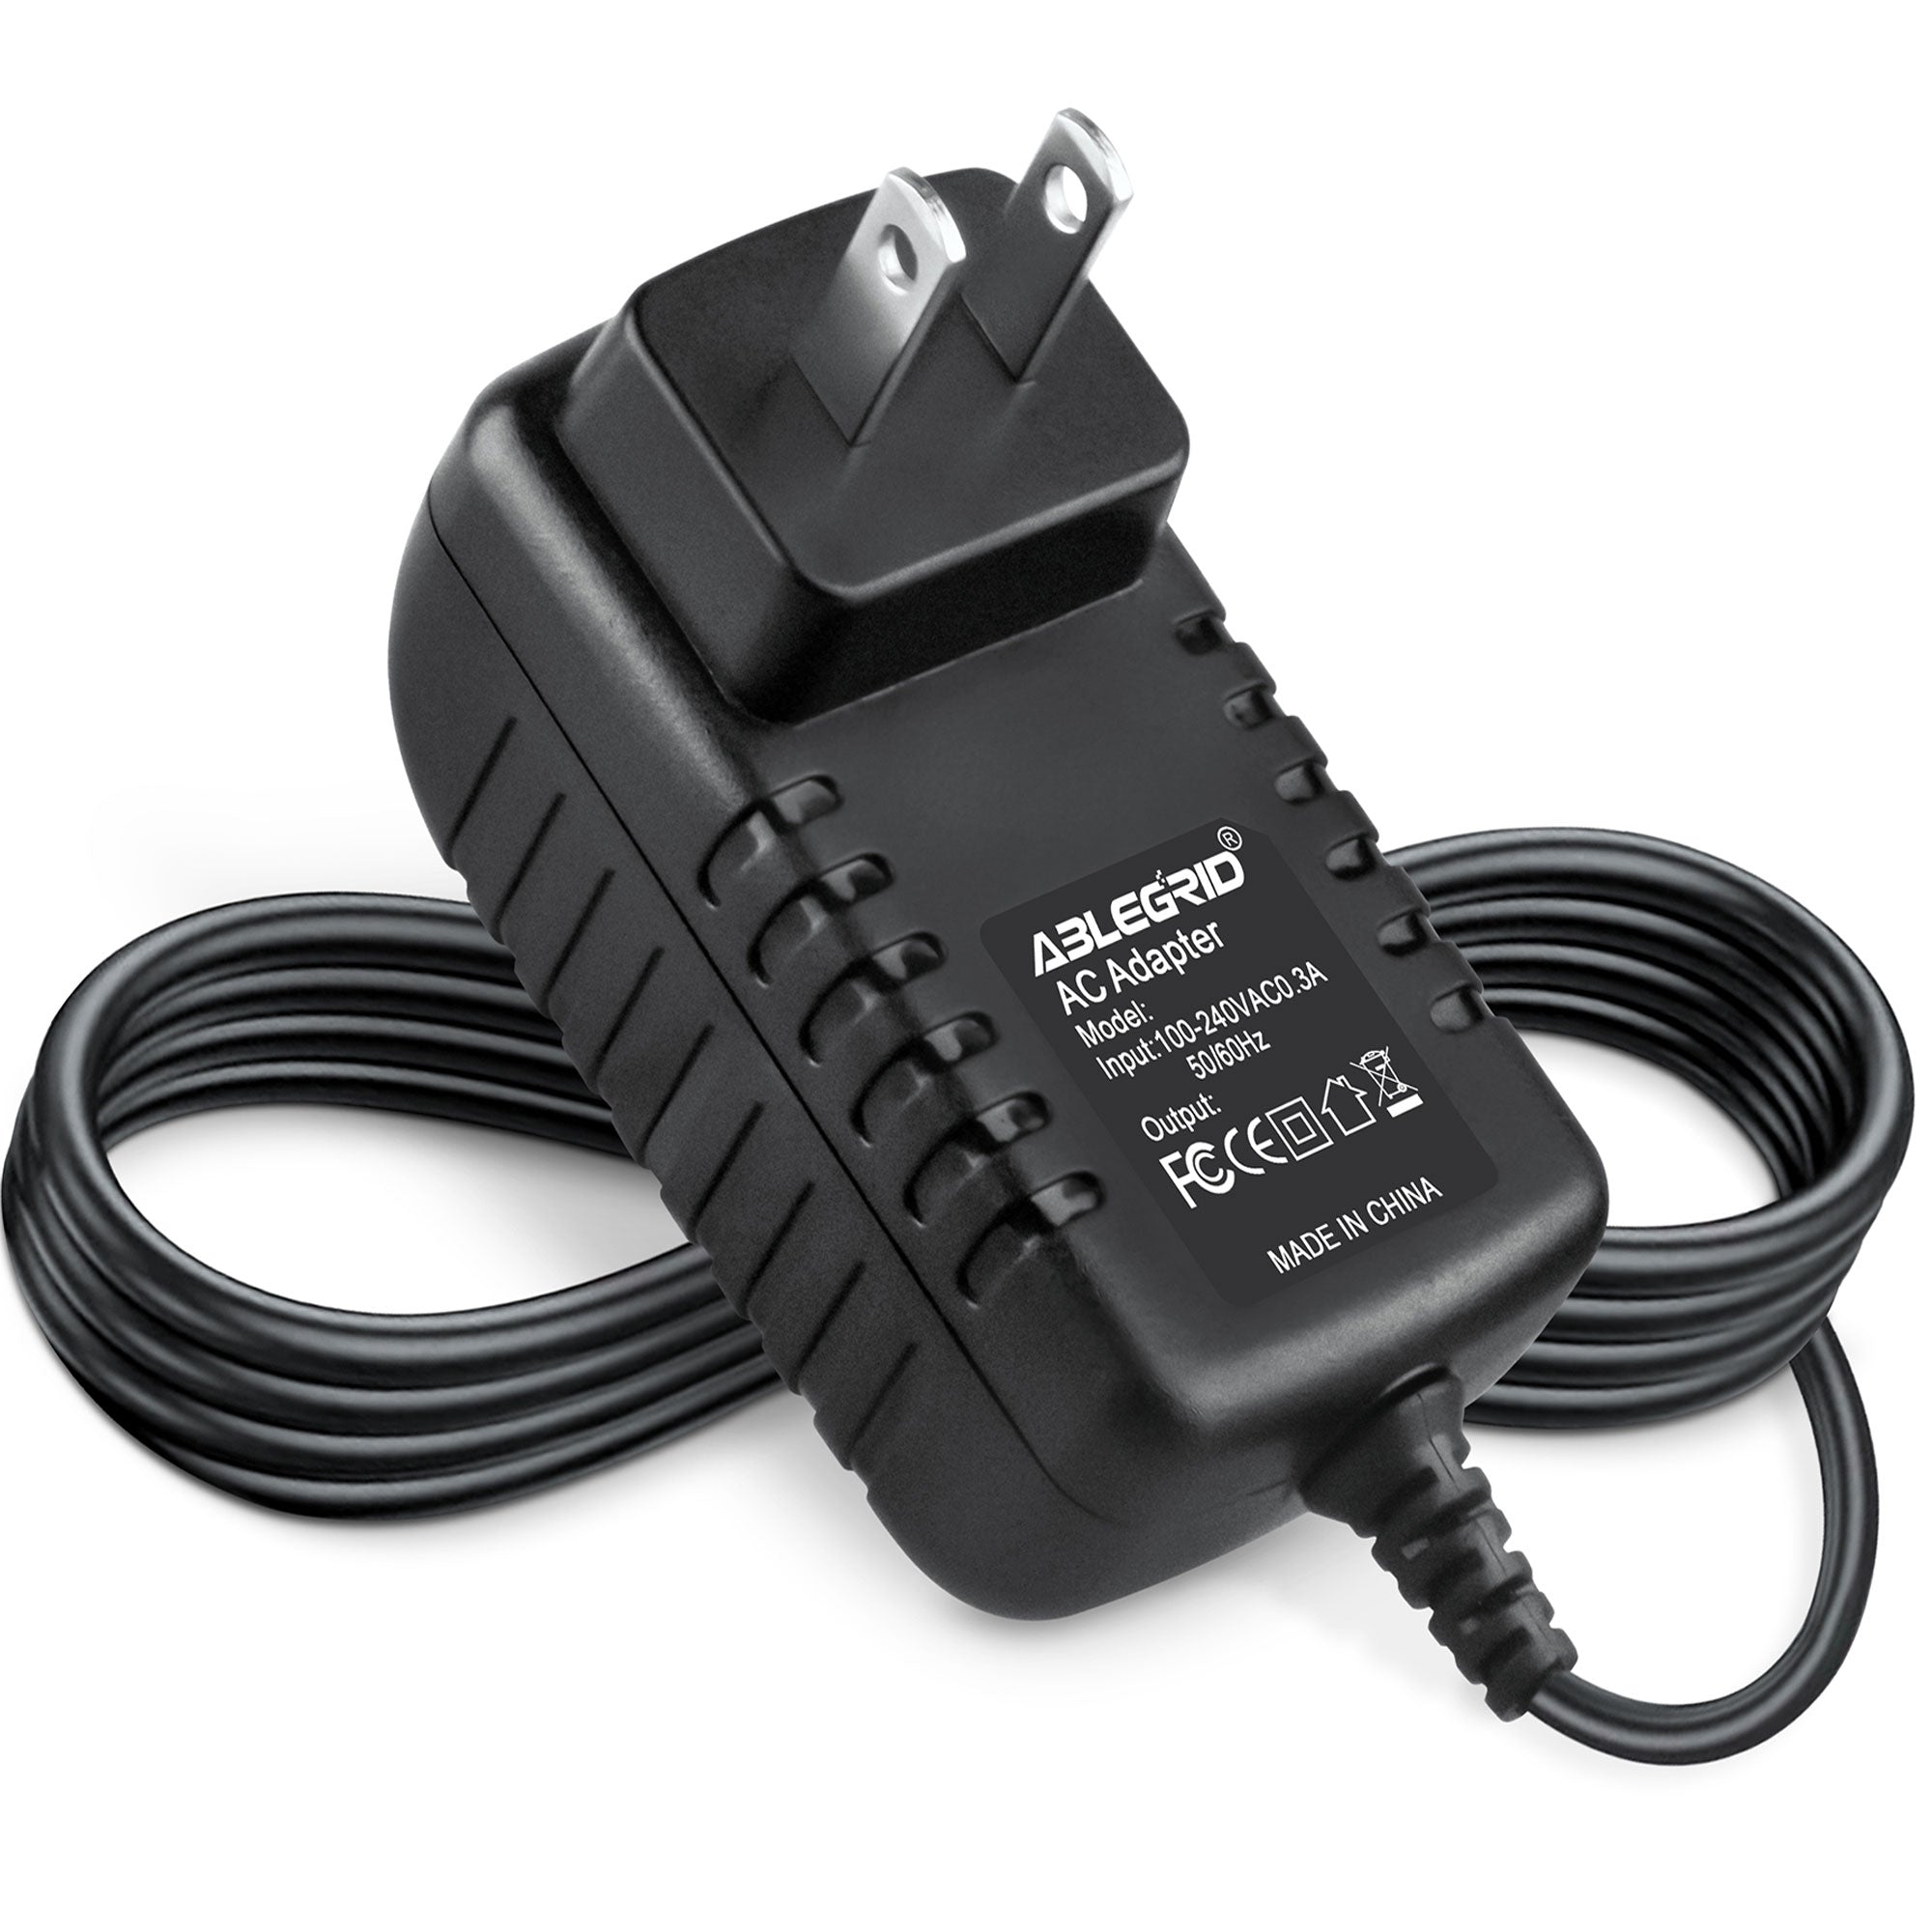 AbleGrid AC / DC Adapter for Cobra MicroTalk CXT437, PR 3550 WX, PR255, PR255 VP 2-Way Radio Power Supply Cord Cable PS Charger Input: 100 - 240 VAC 50/60Hz Worldwide Voltage Use Mains PSU